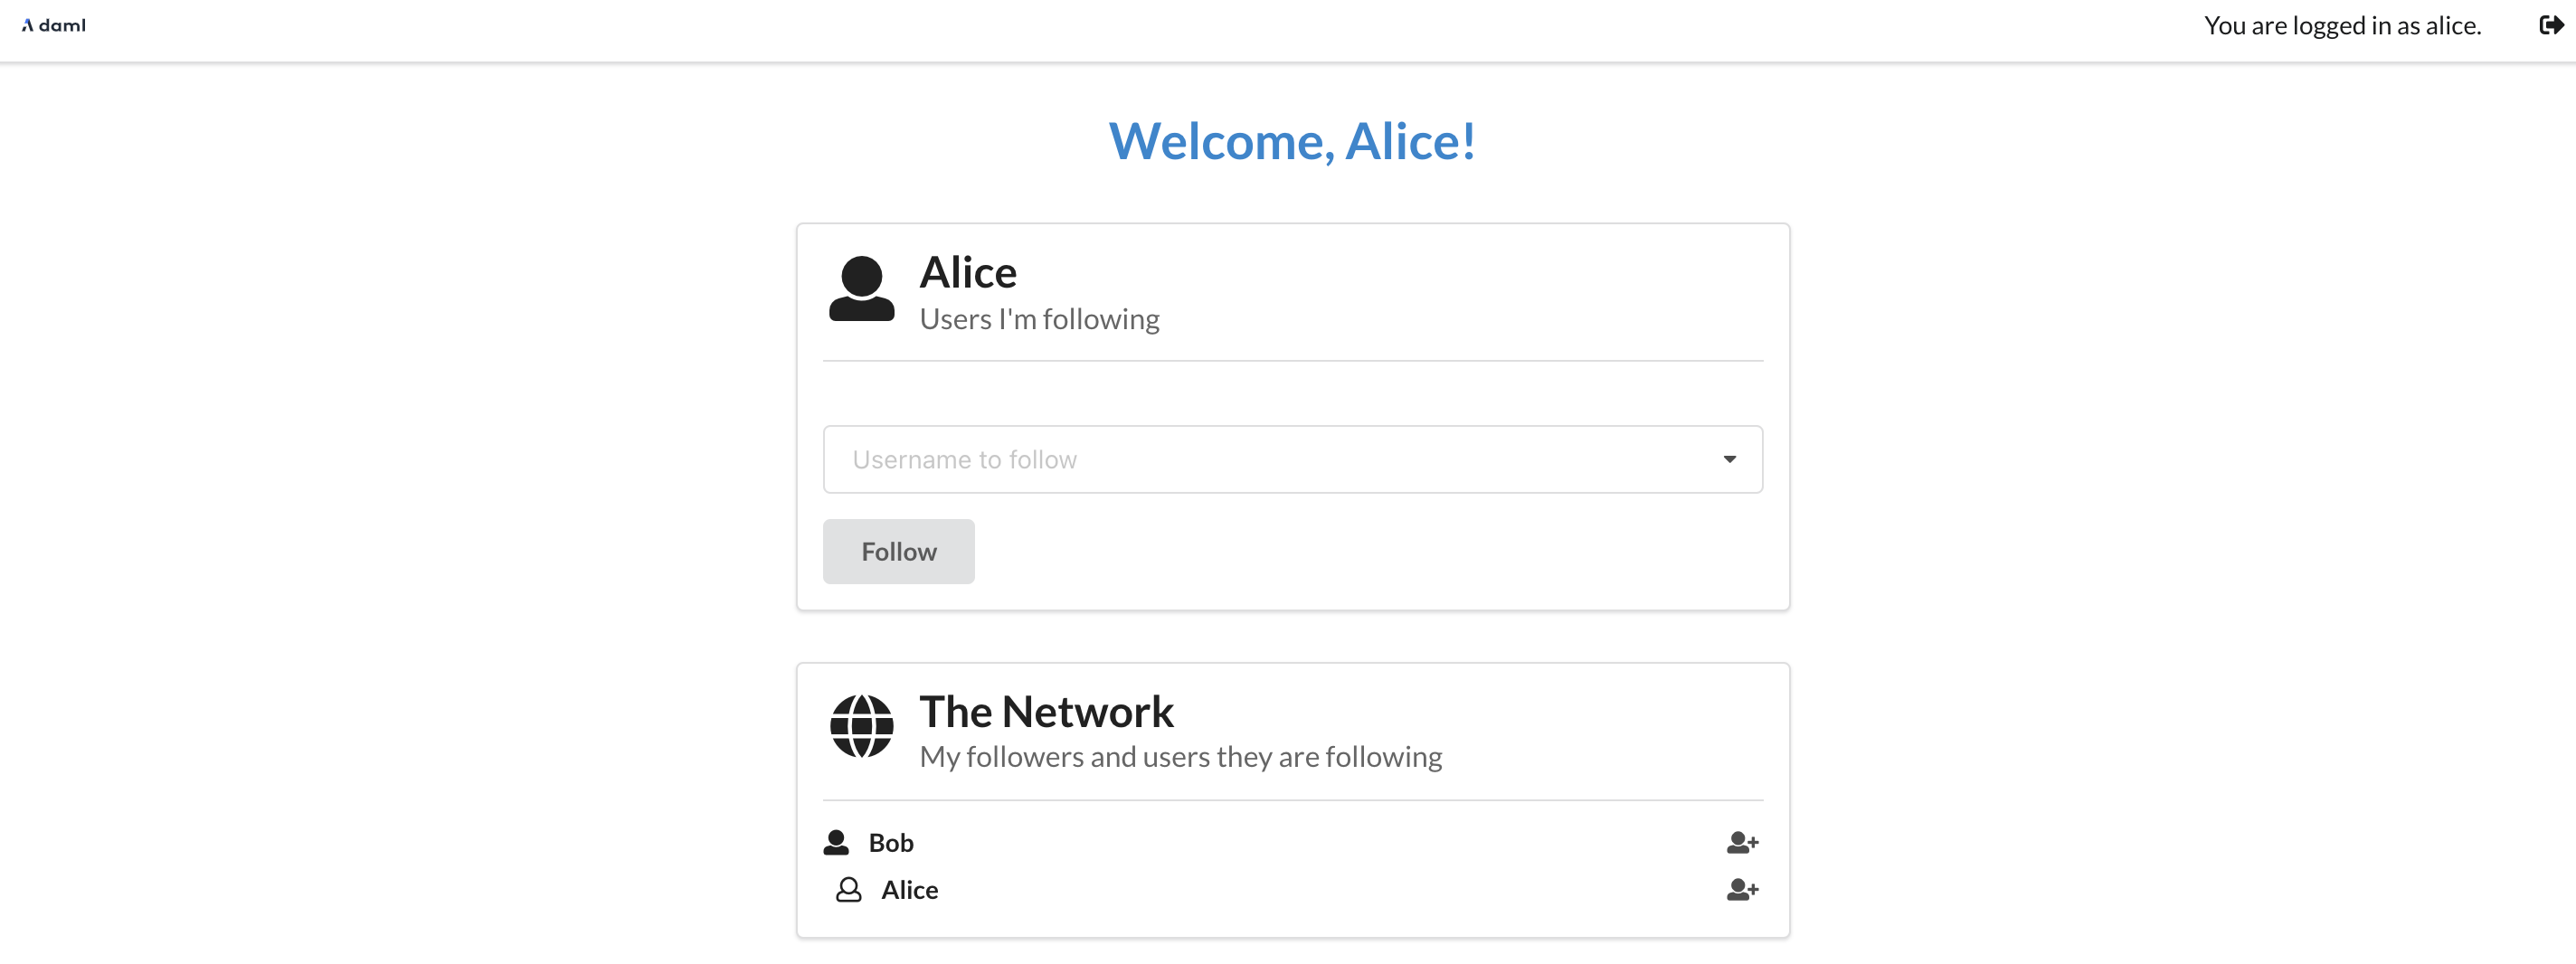 The app from Alice's point of view, with the list of users Bob is following in the The Network section.